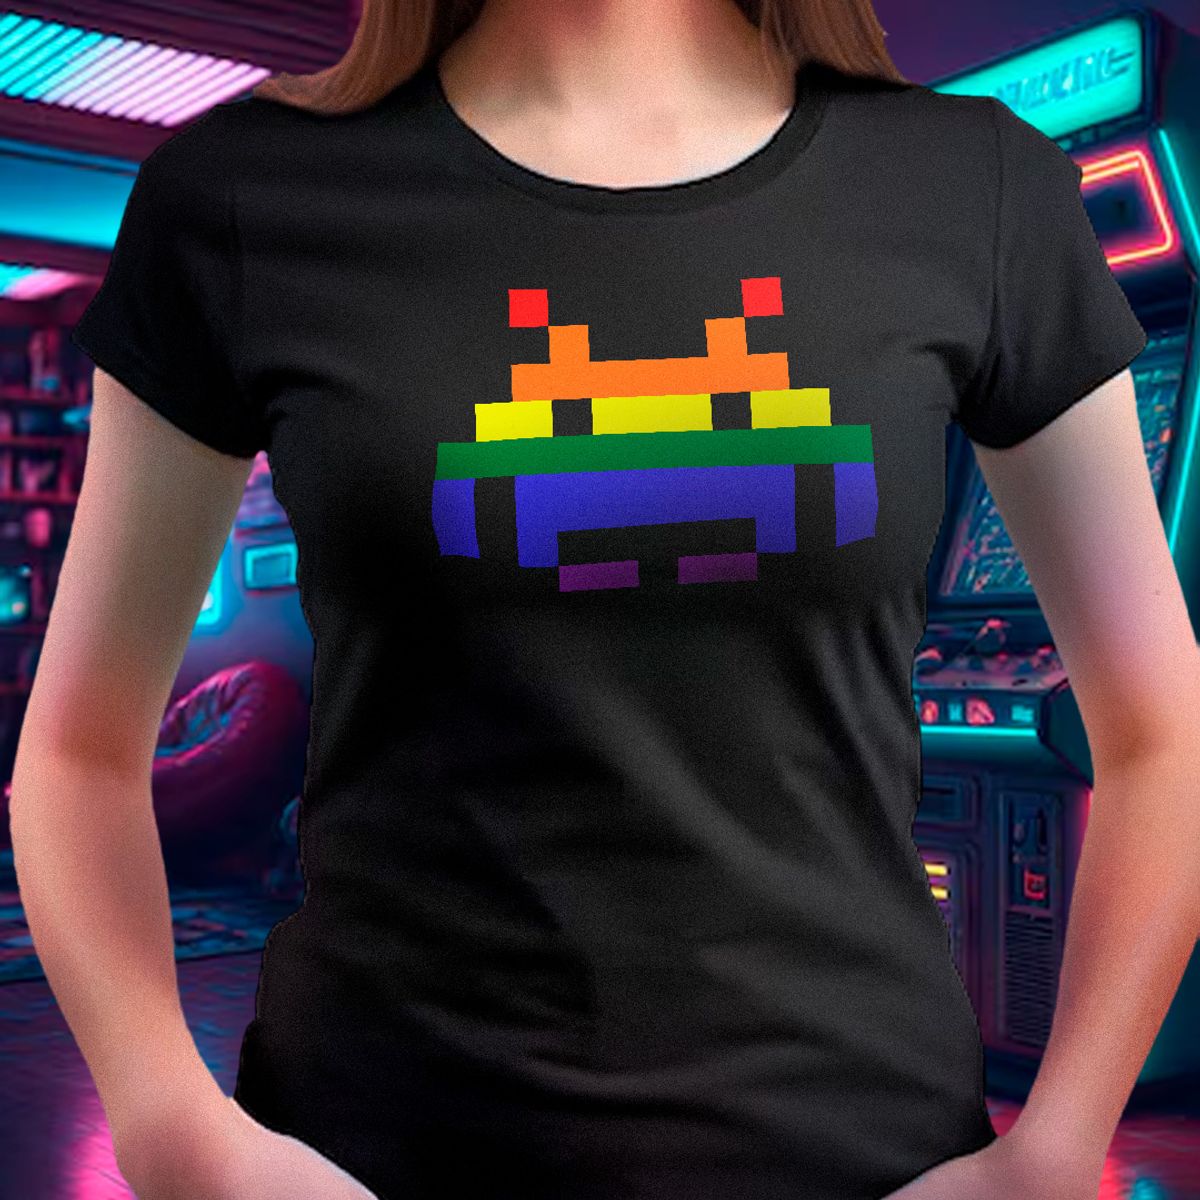 Nome do produto: Baby Long Space Invaders Pride